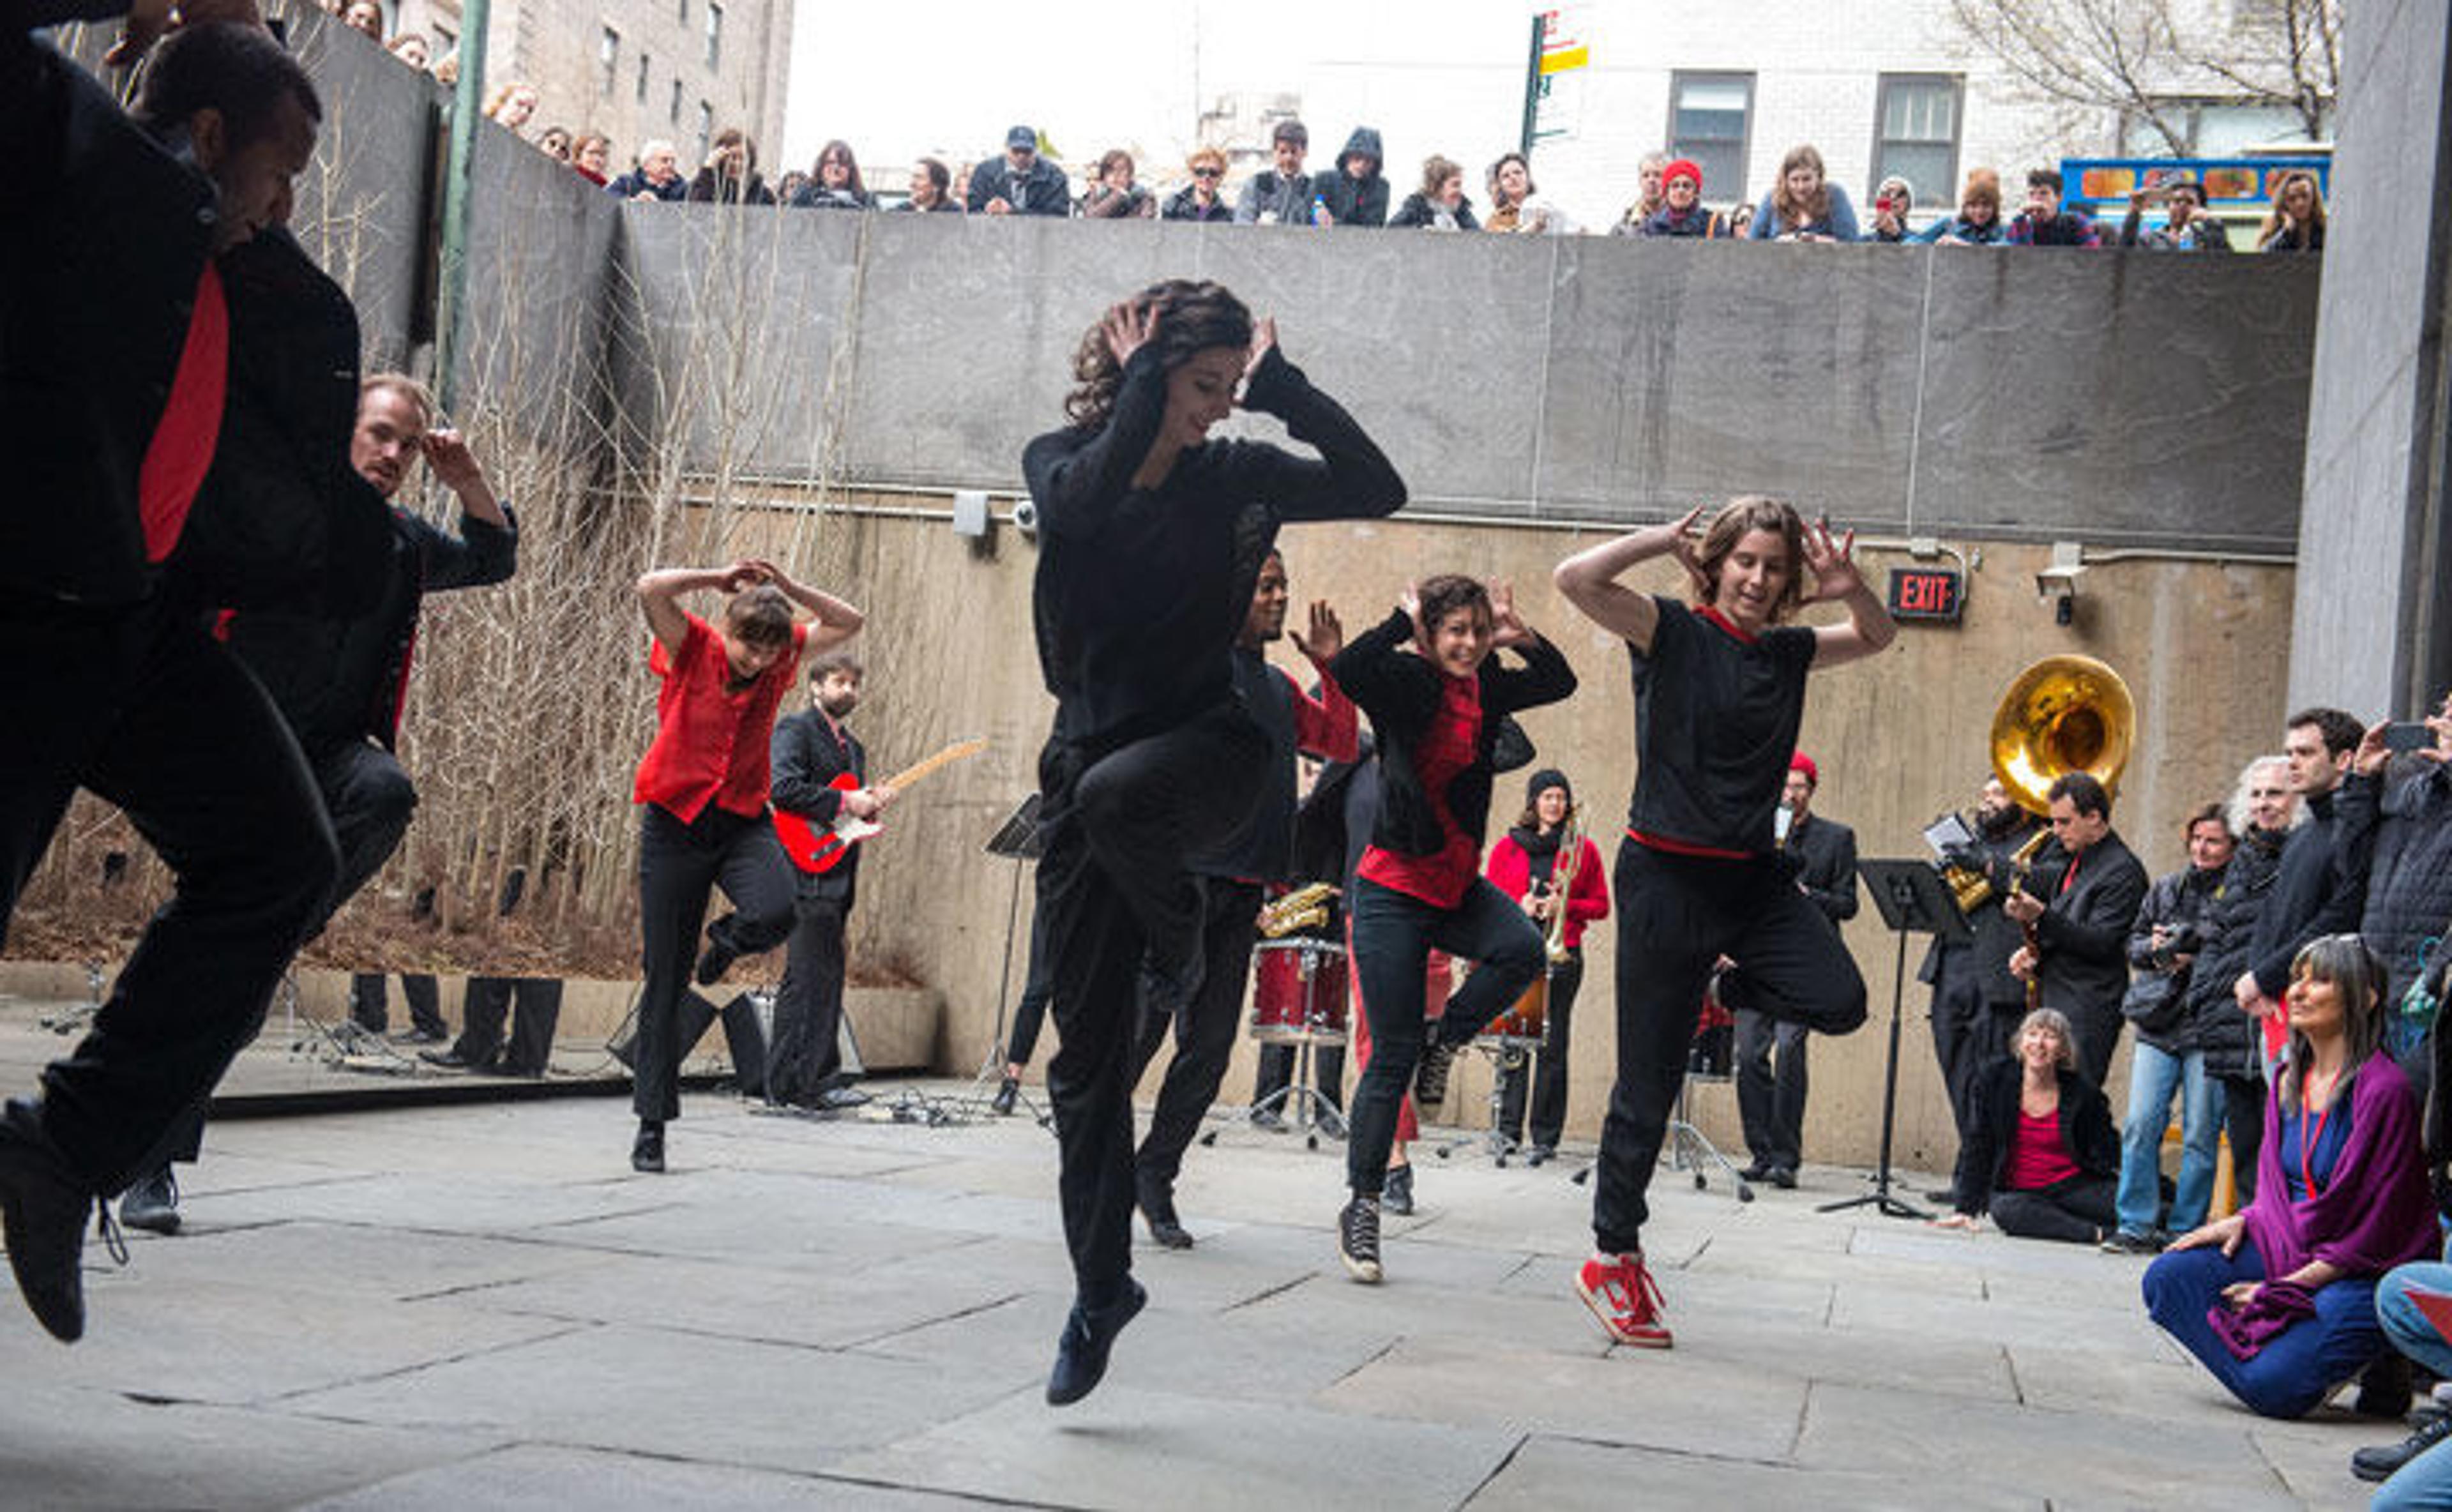 A group of dancers perform in The Met Breuer's Sunken Garden while accompanied by a brass band.